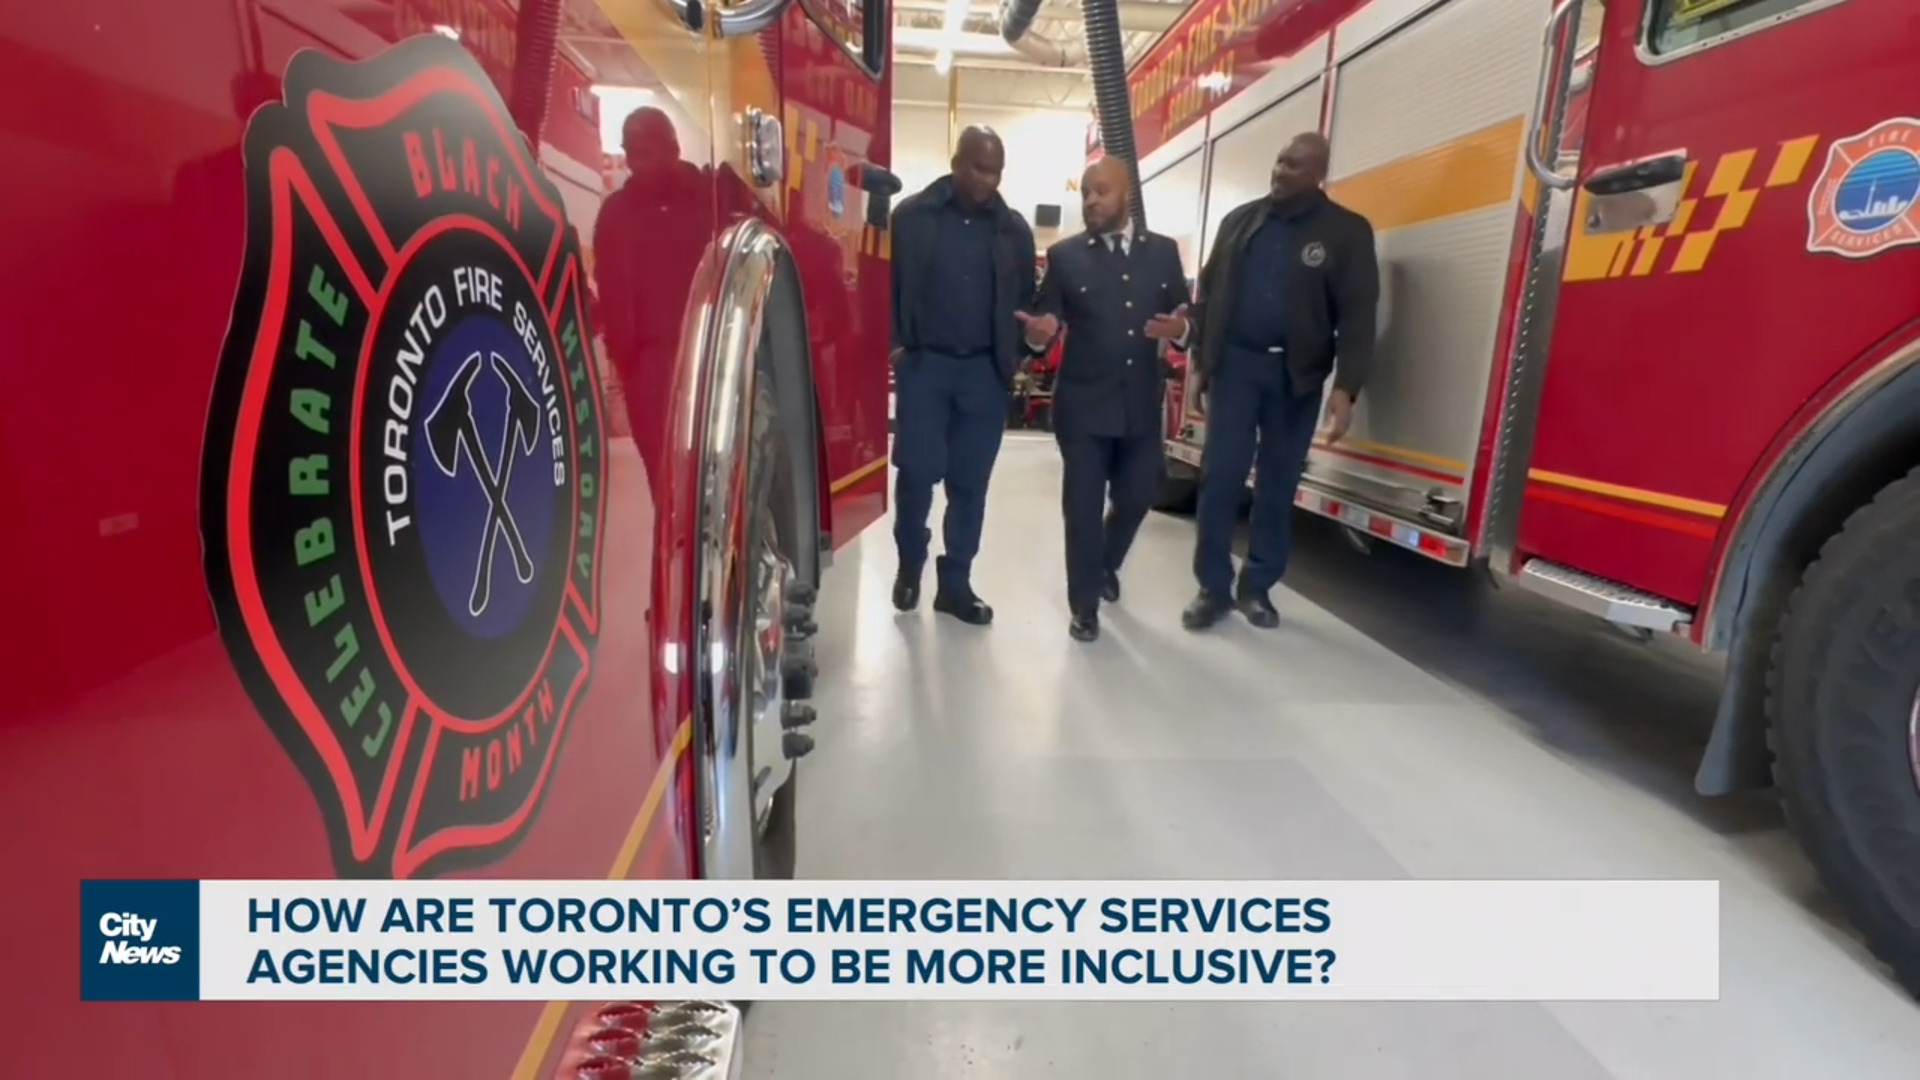 How are Toronto’s emergency services agencies working to be more inclusive?